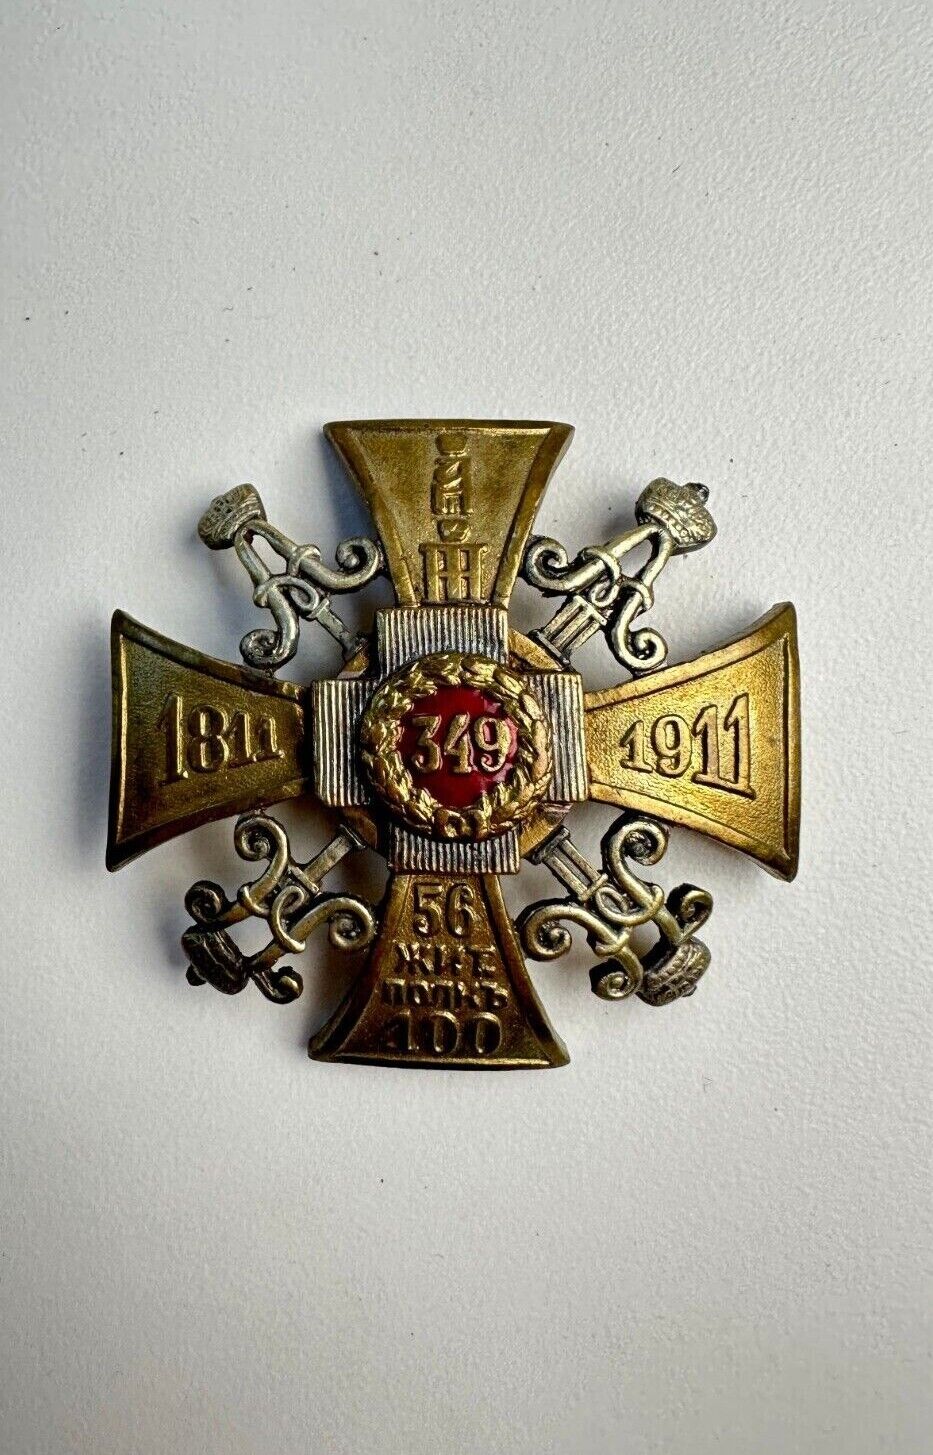 Russia badge 1811-1911 56th Zhitomir Infantry Regiment Military Imperial